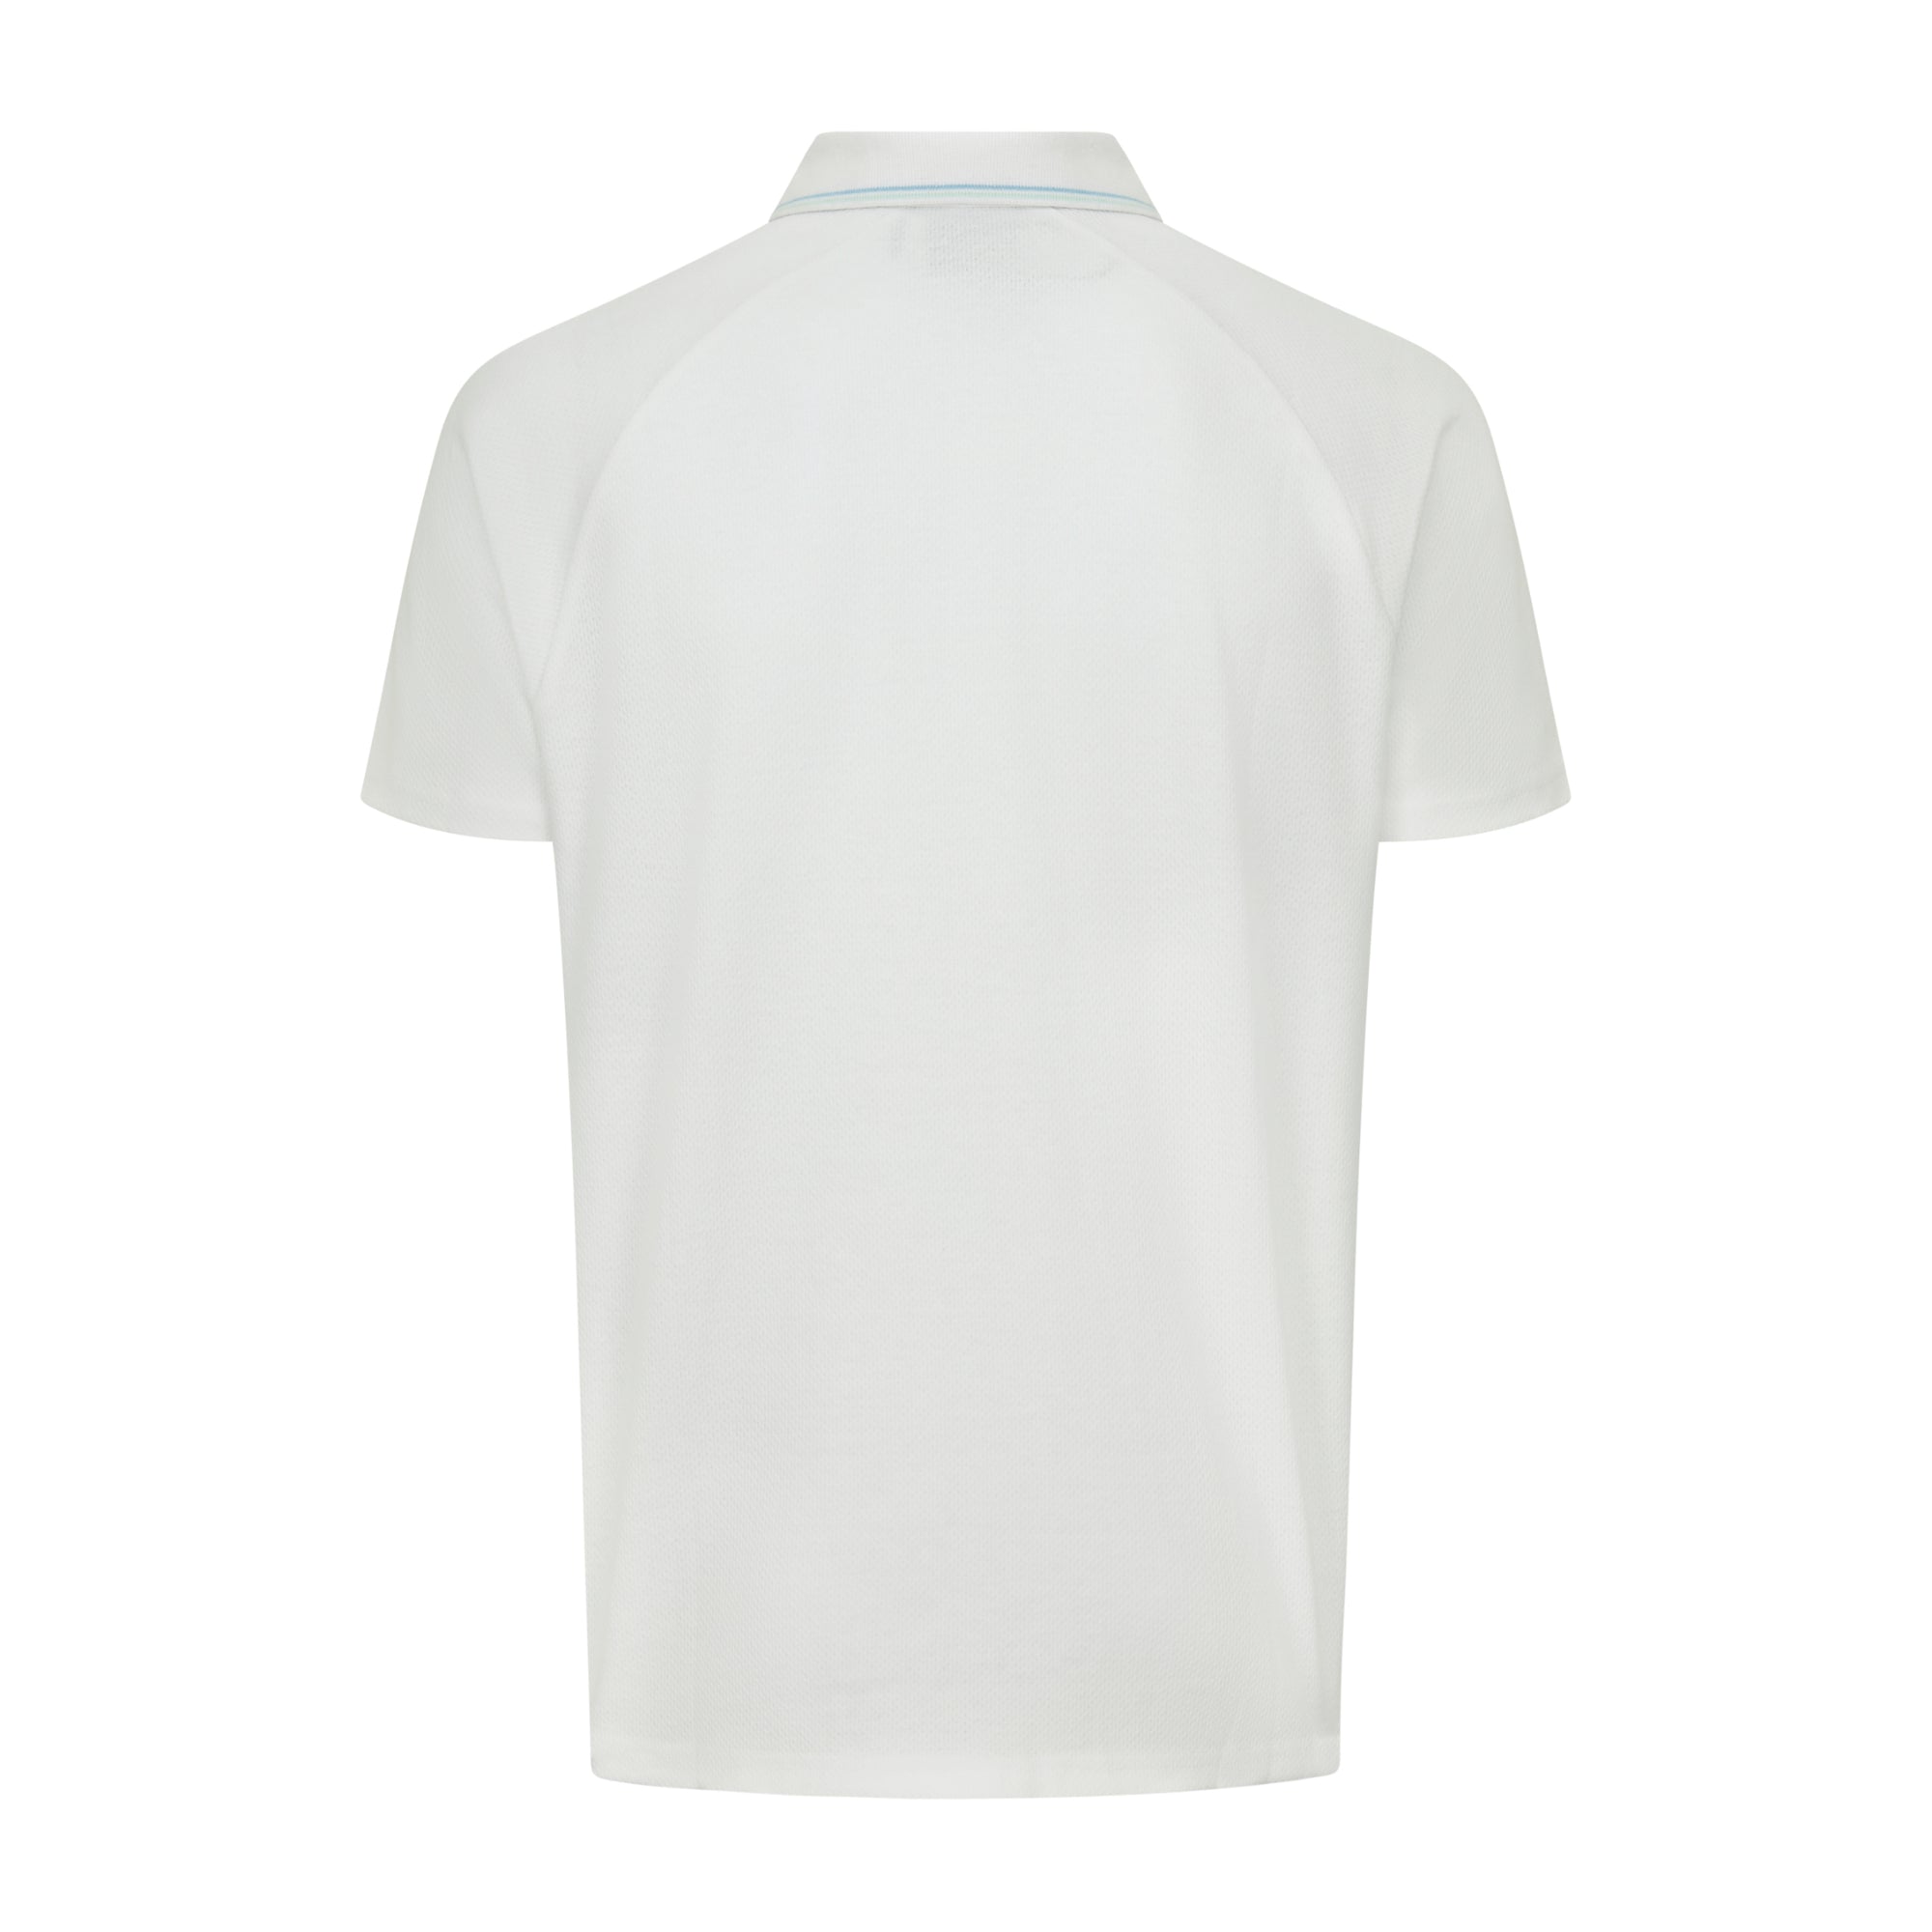 2023 Ryder Cup Men's White Polo Shirt - Front